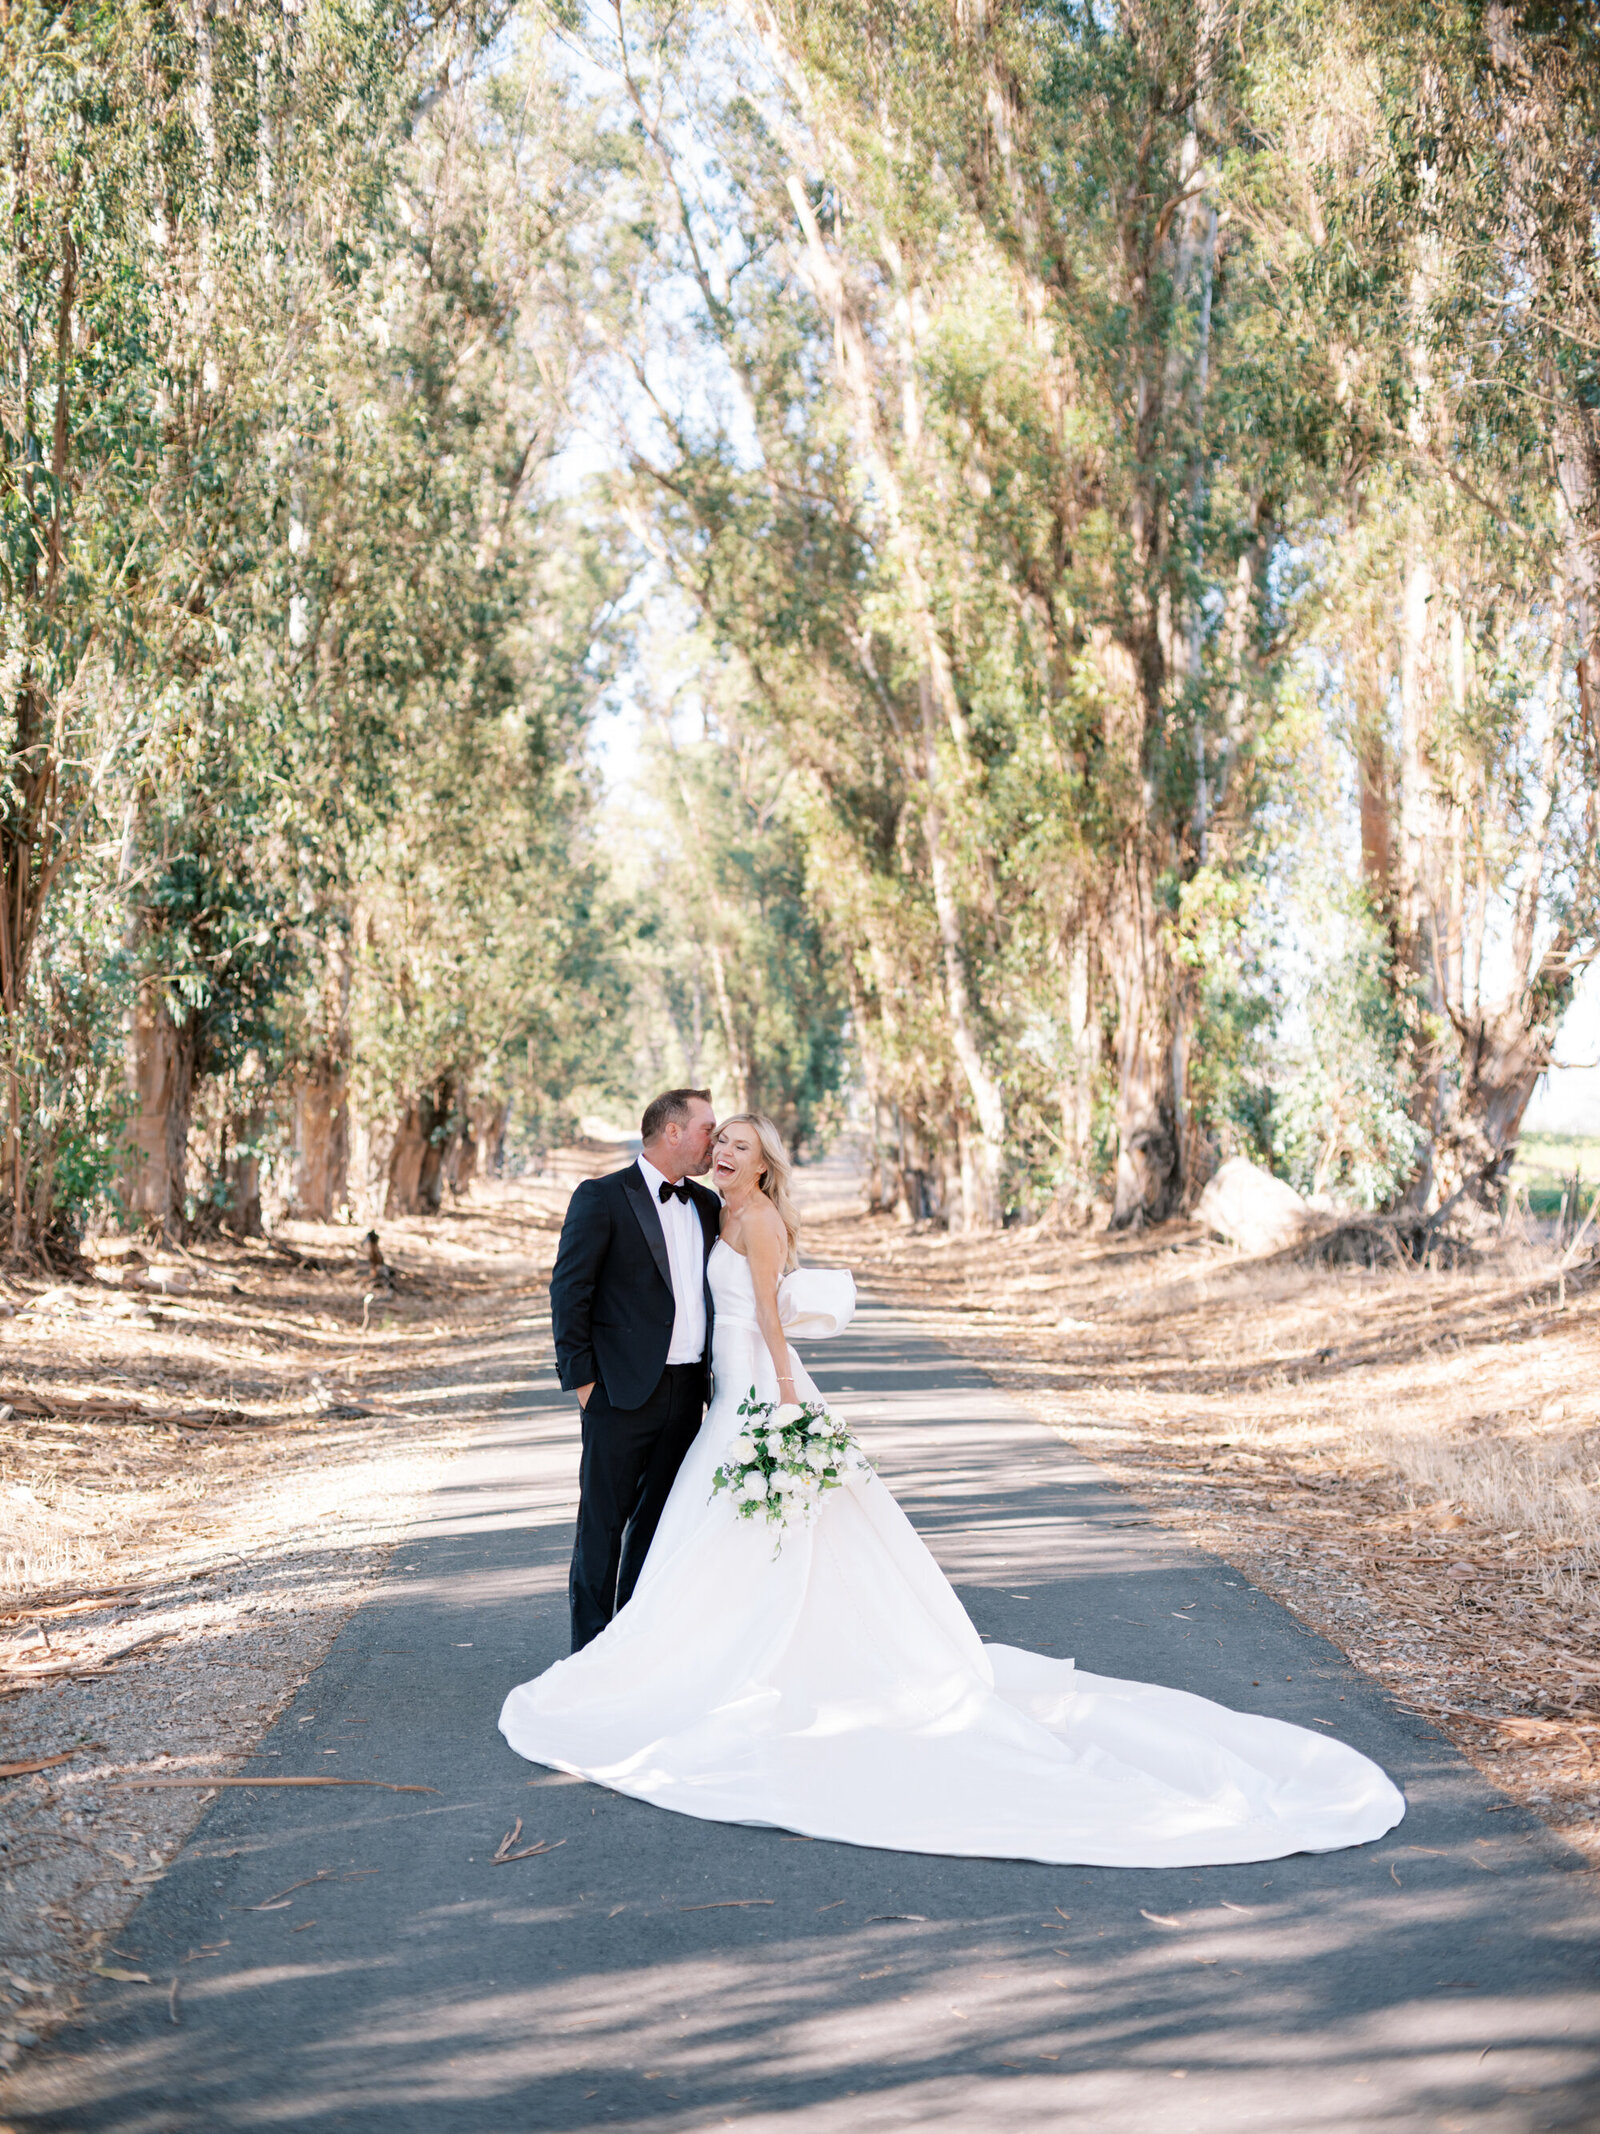 Stanly Ranch Wedding in Napa, California